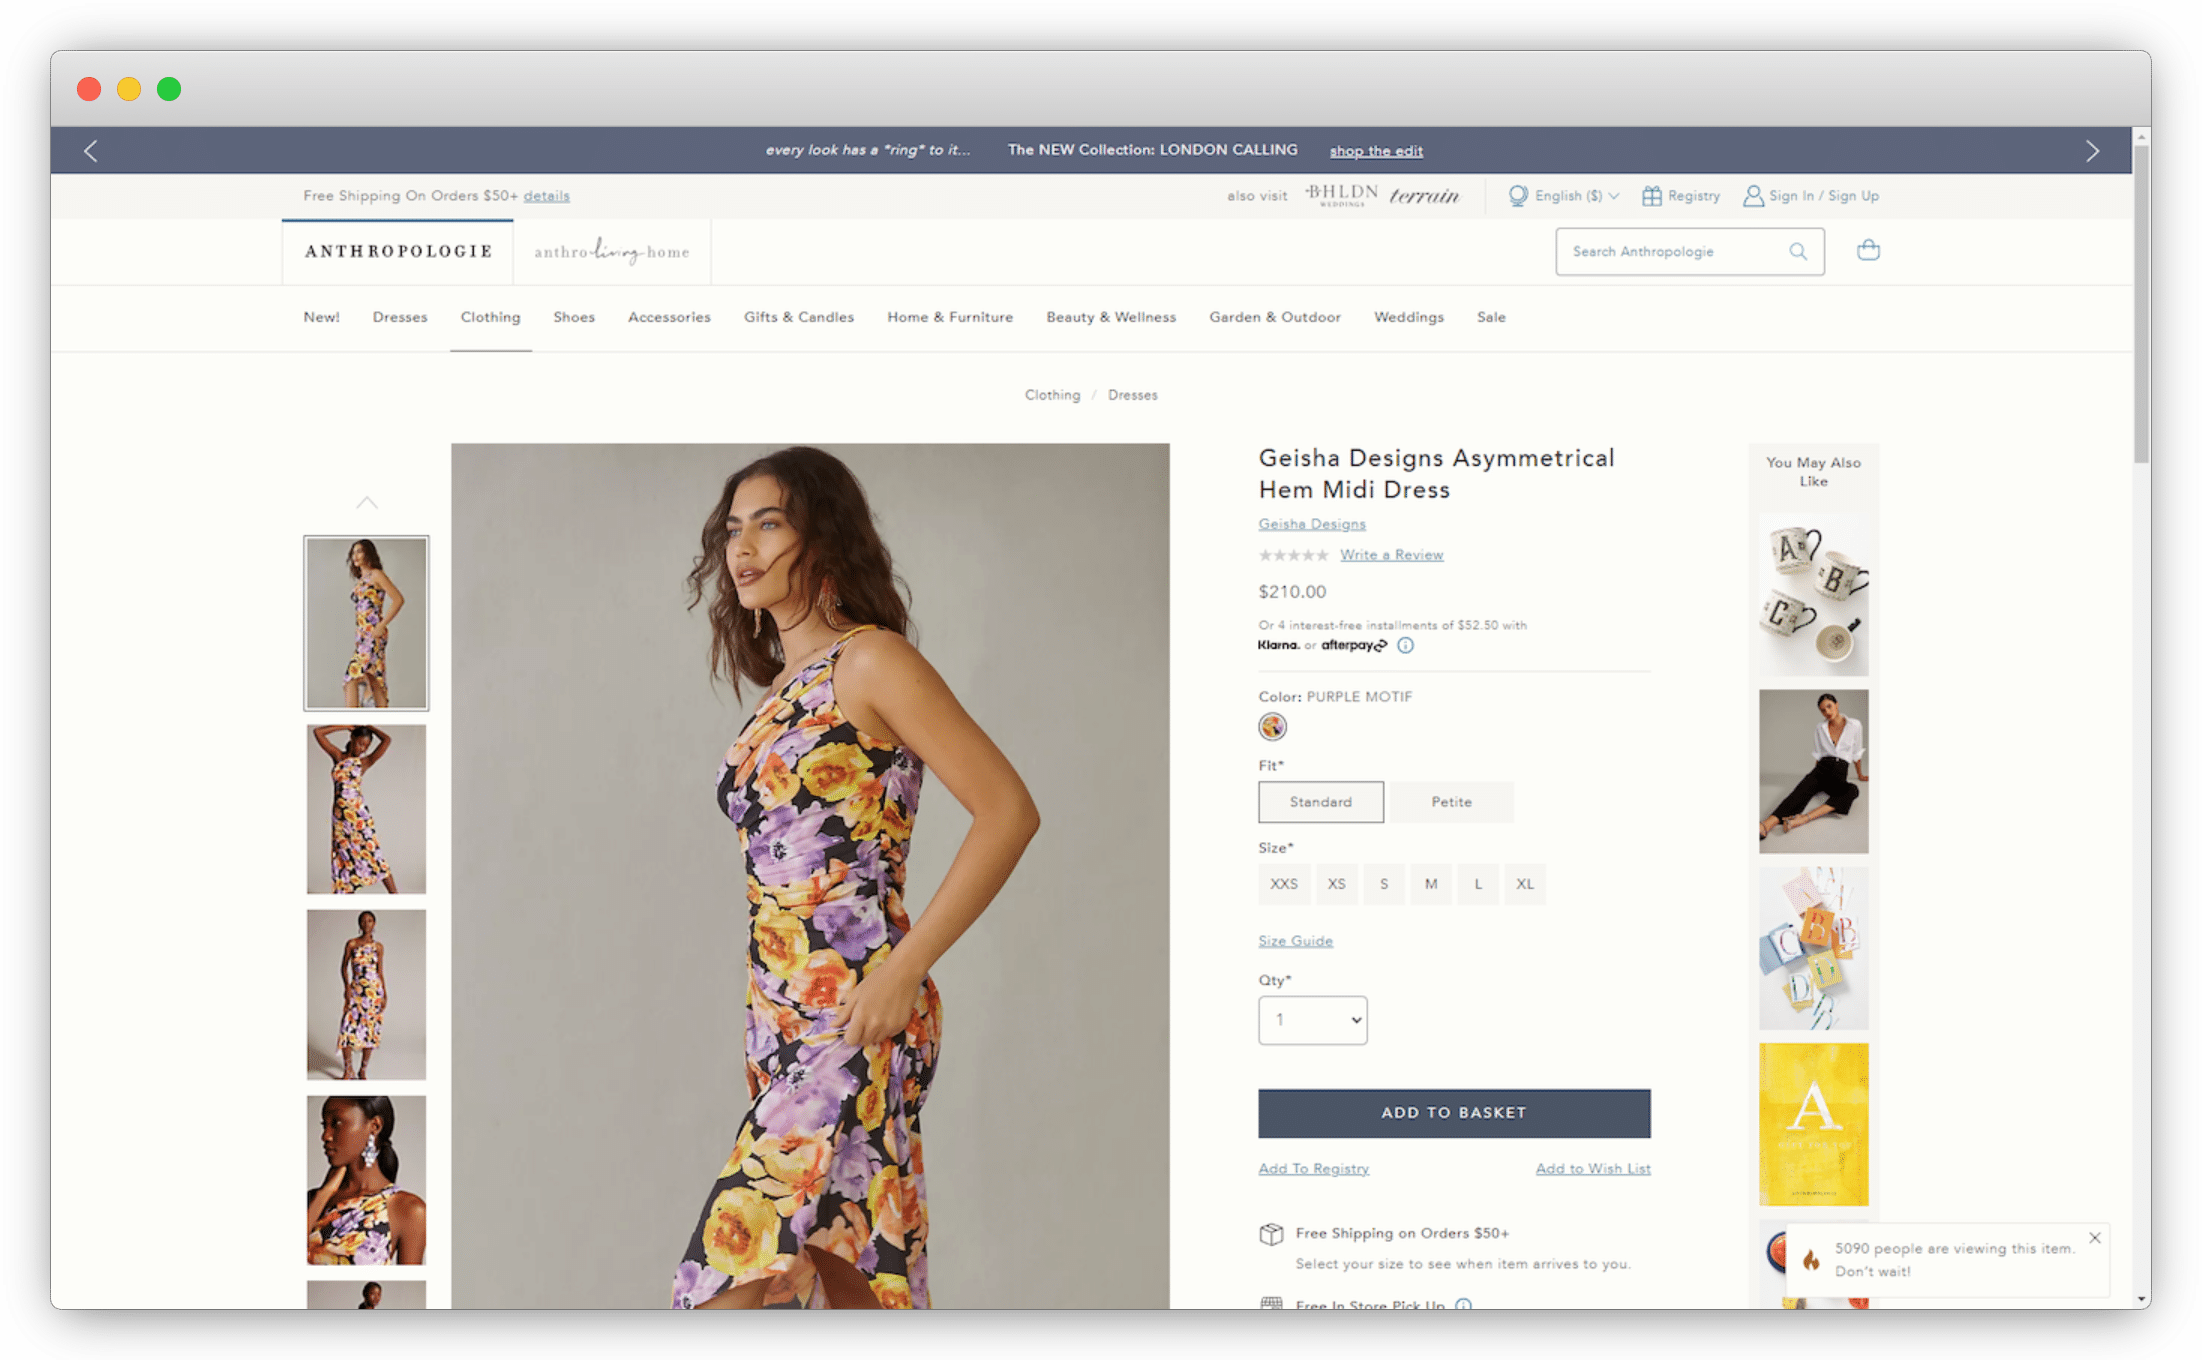 The second step of the e-commerce customer journey is the product detail pages.